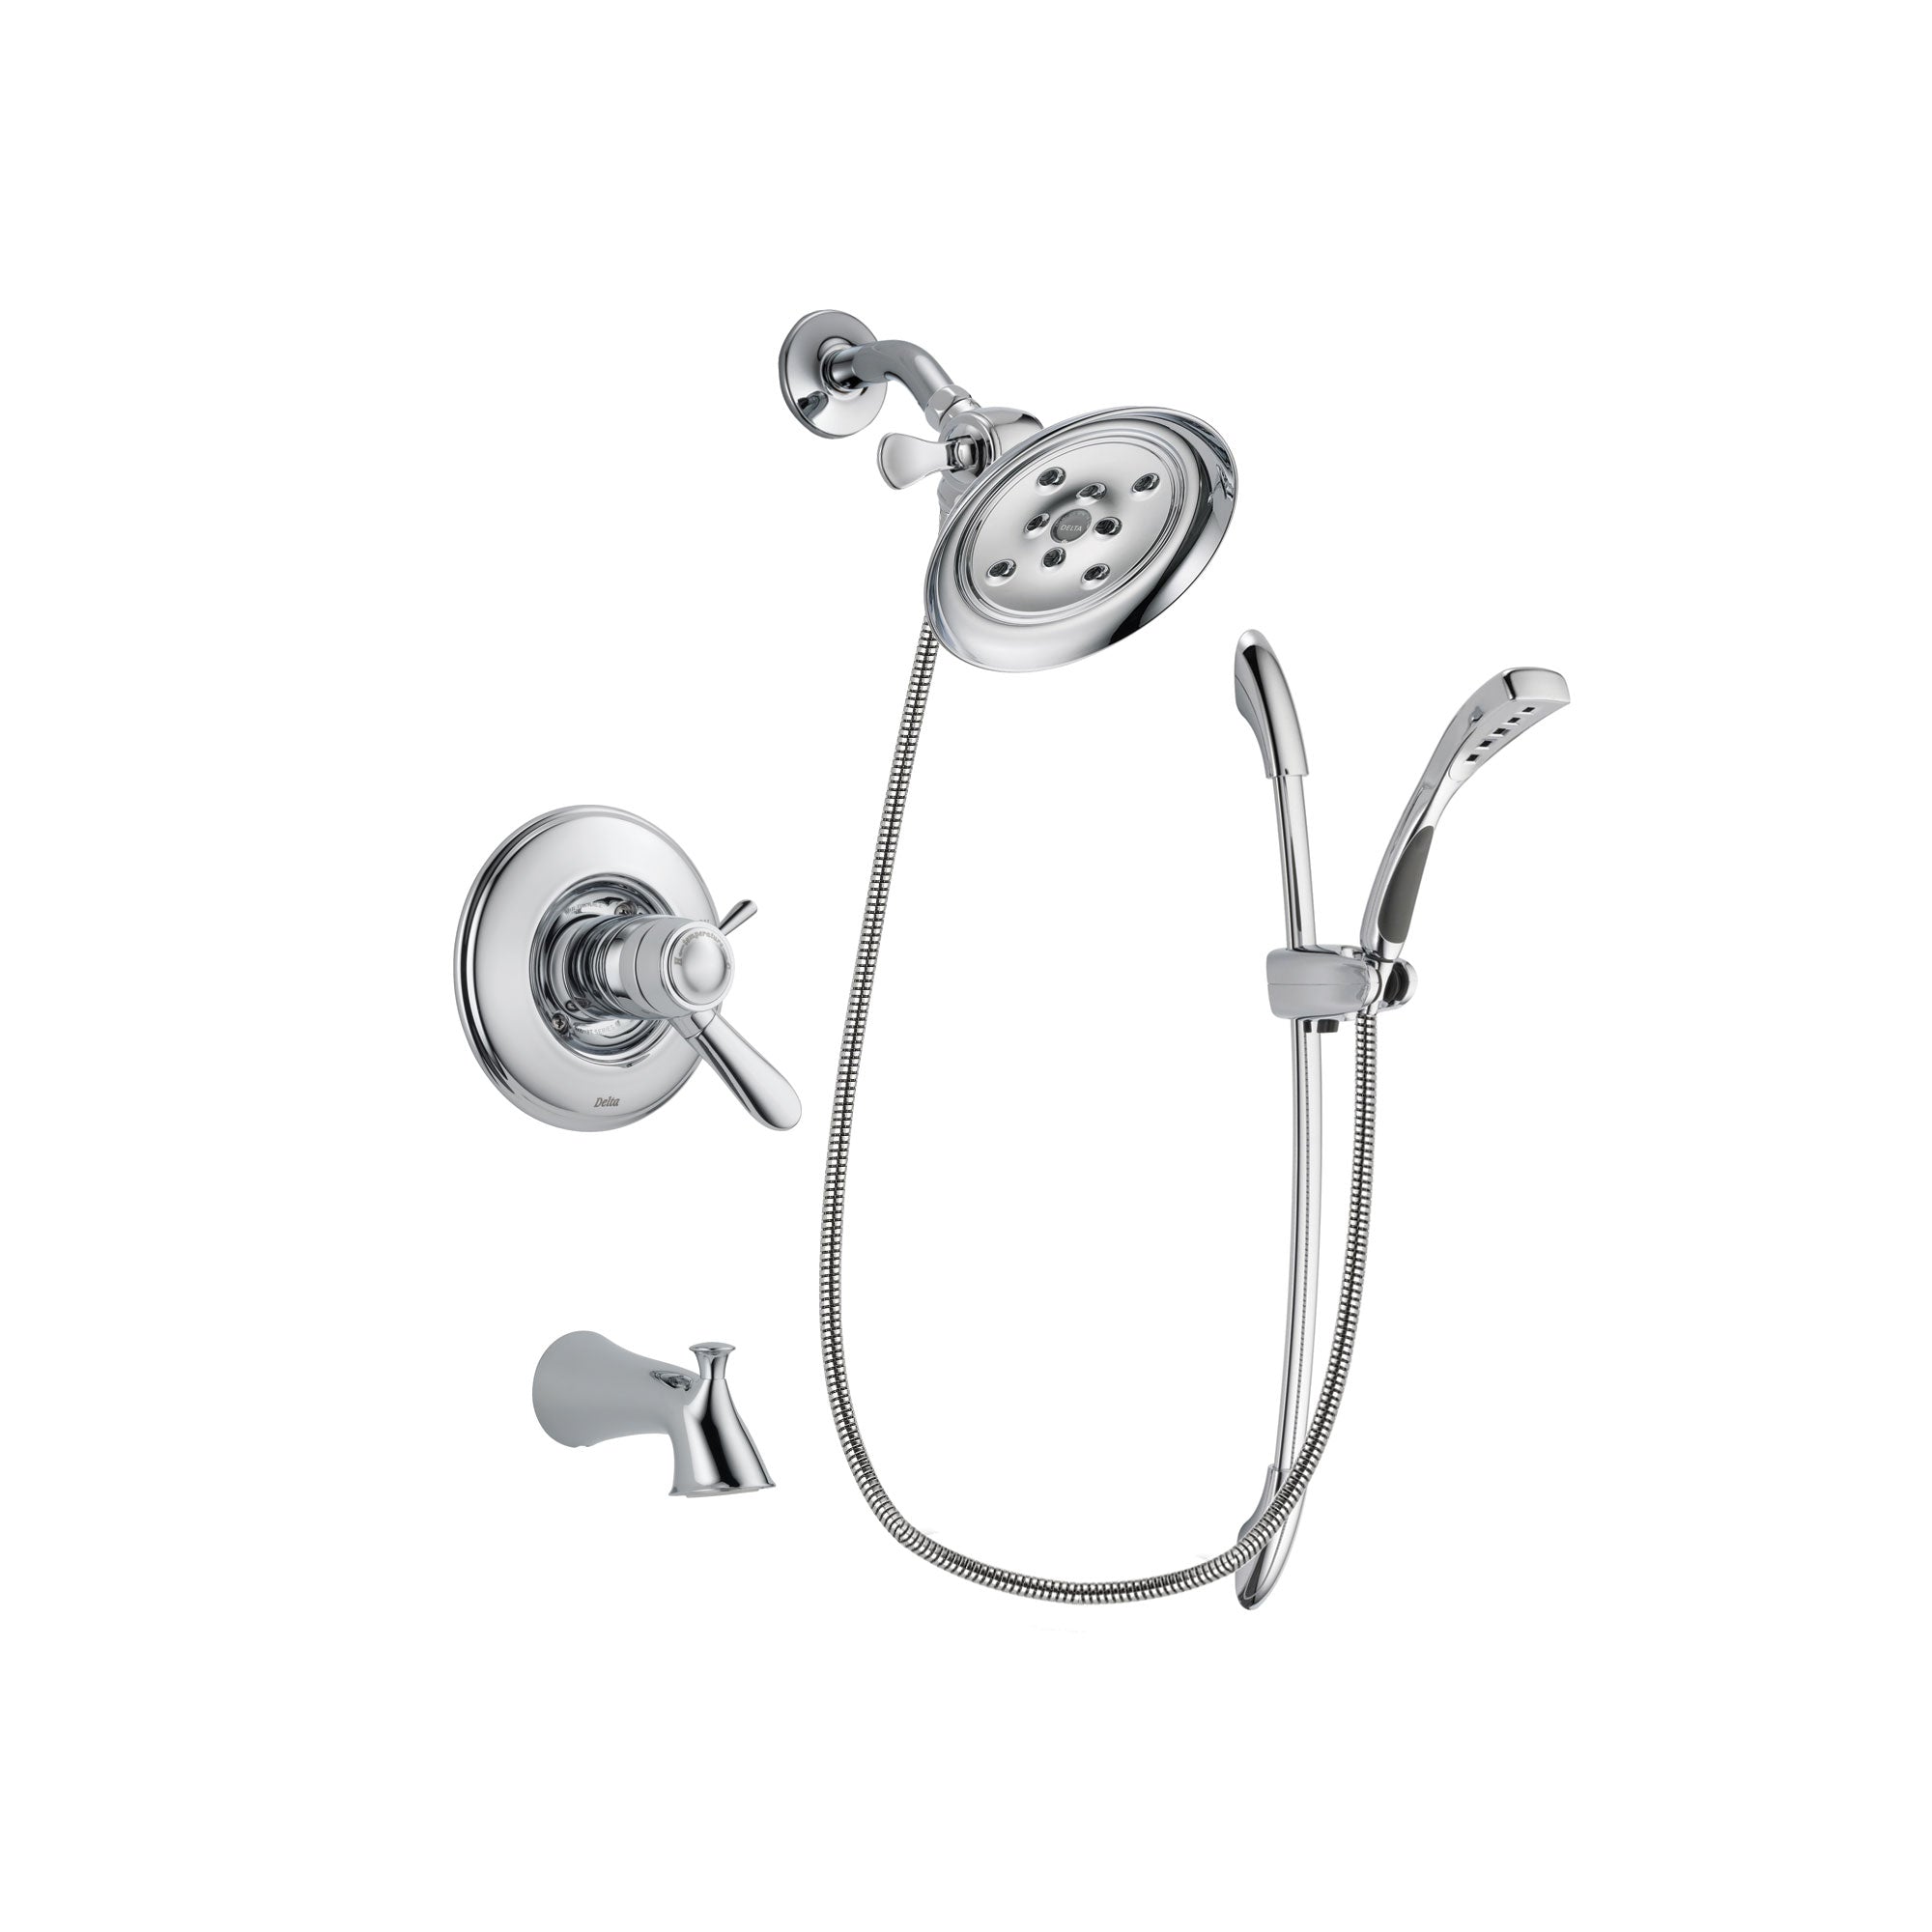 Delta Lahara Chrome Finish Thermostatic Tub and Shower Faucet System Package with Large Rain Showerhead and Handheld Shower with Slide Bar Includes Rough-in Valve and Tub Spout DSP0493V